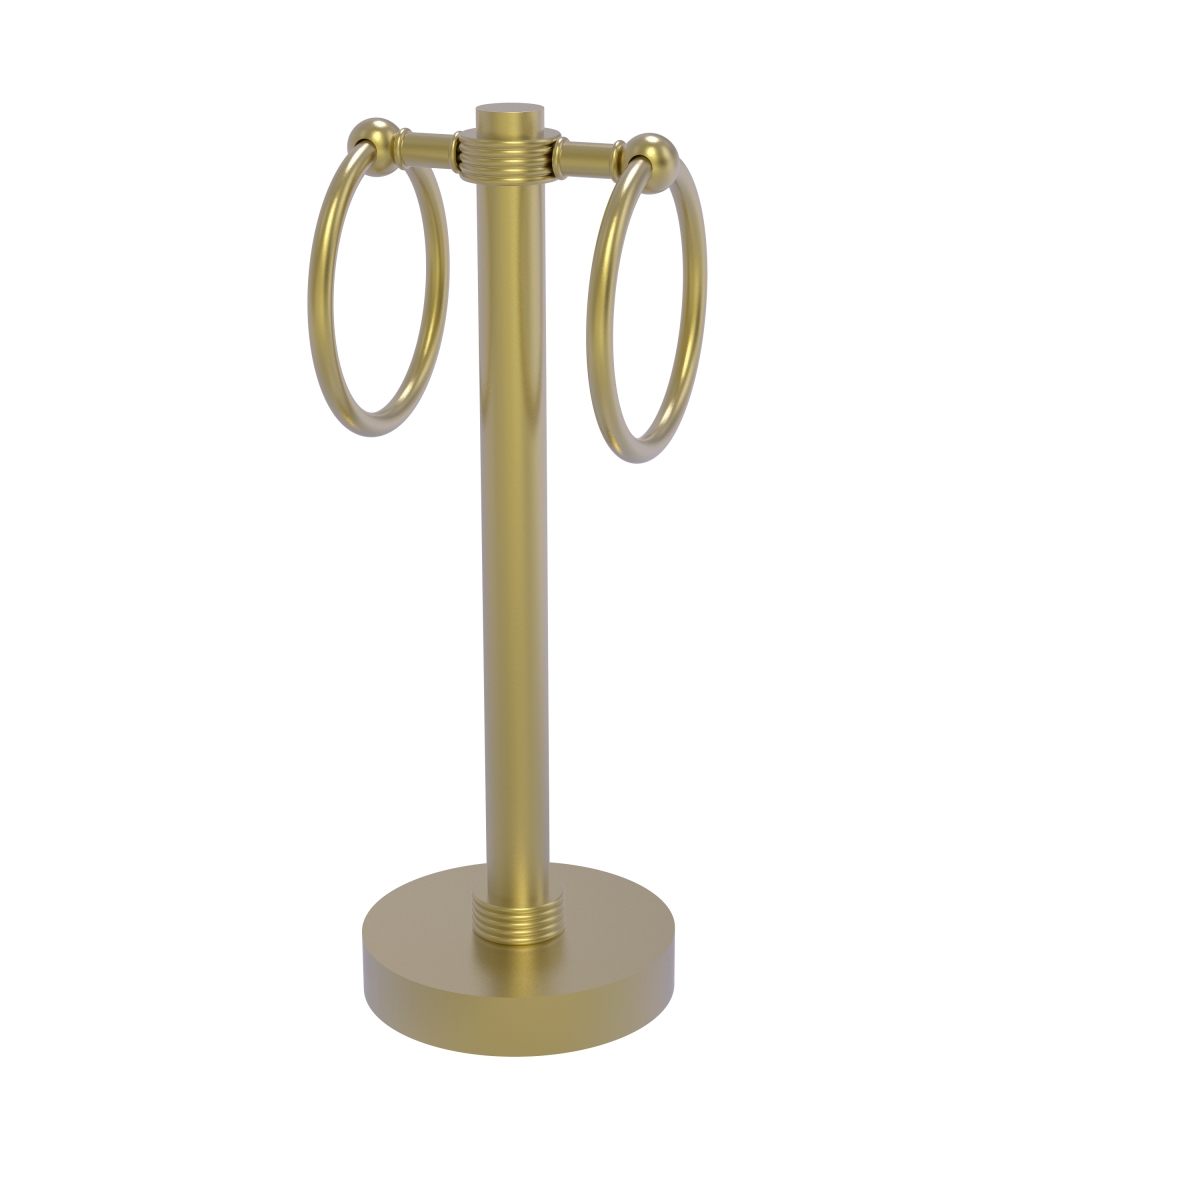 953g-sbr Vanity Top 2 Towel Ring Guest Towel Holder With Groovy Accents, Satin Brass